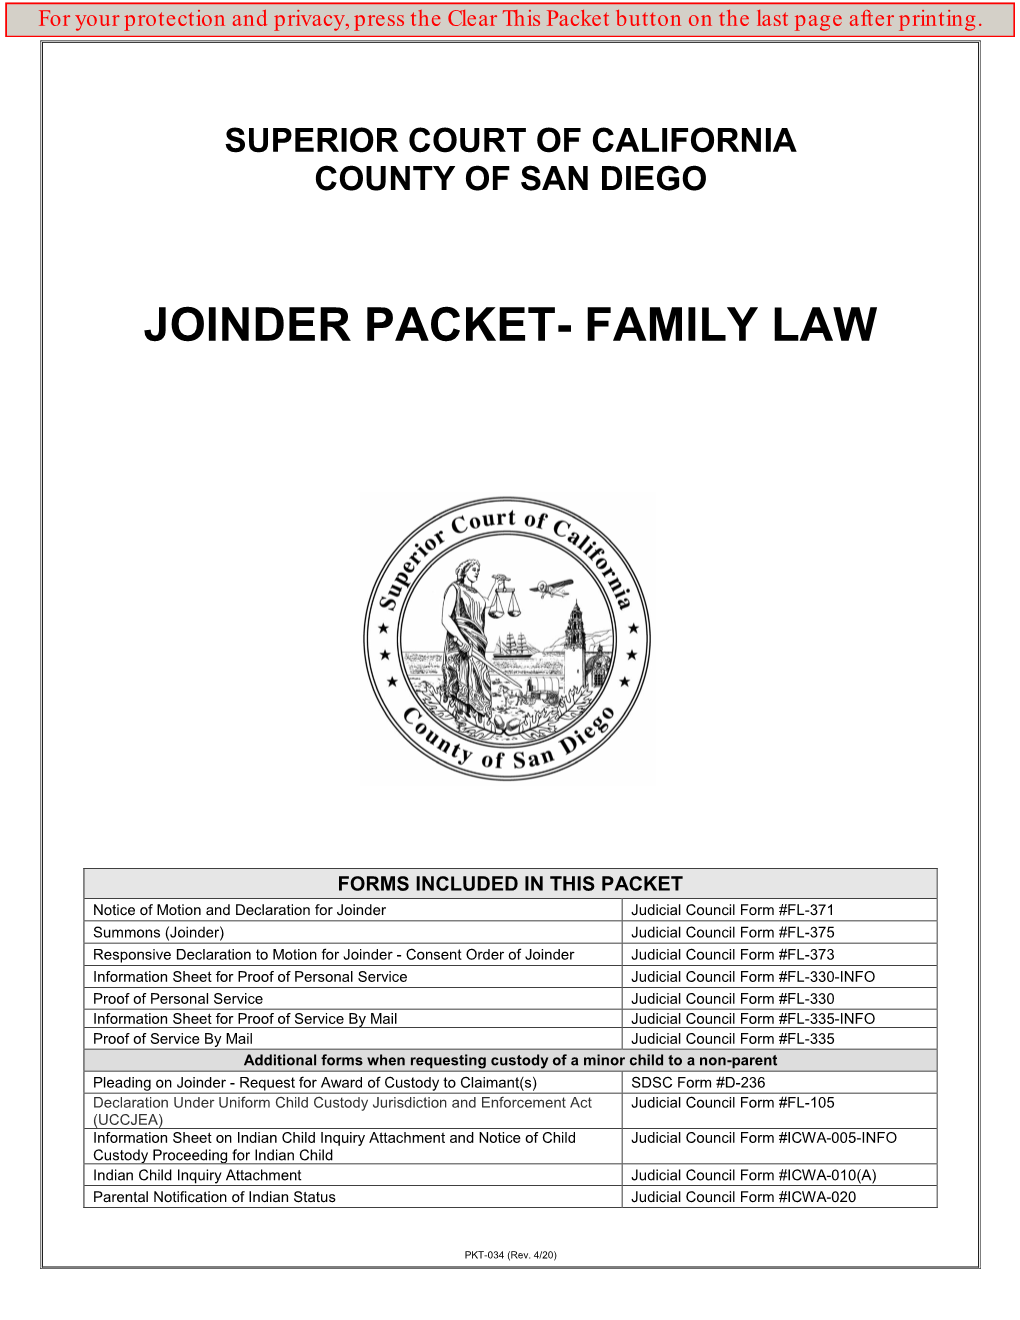 Joinder Packet- Family Law